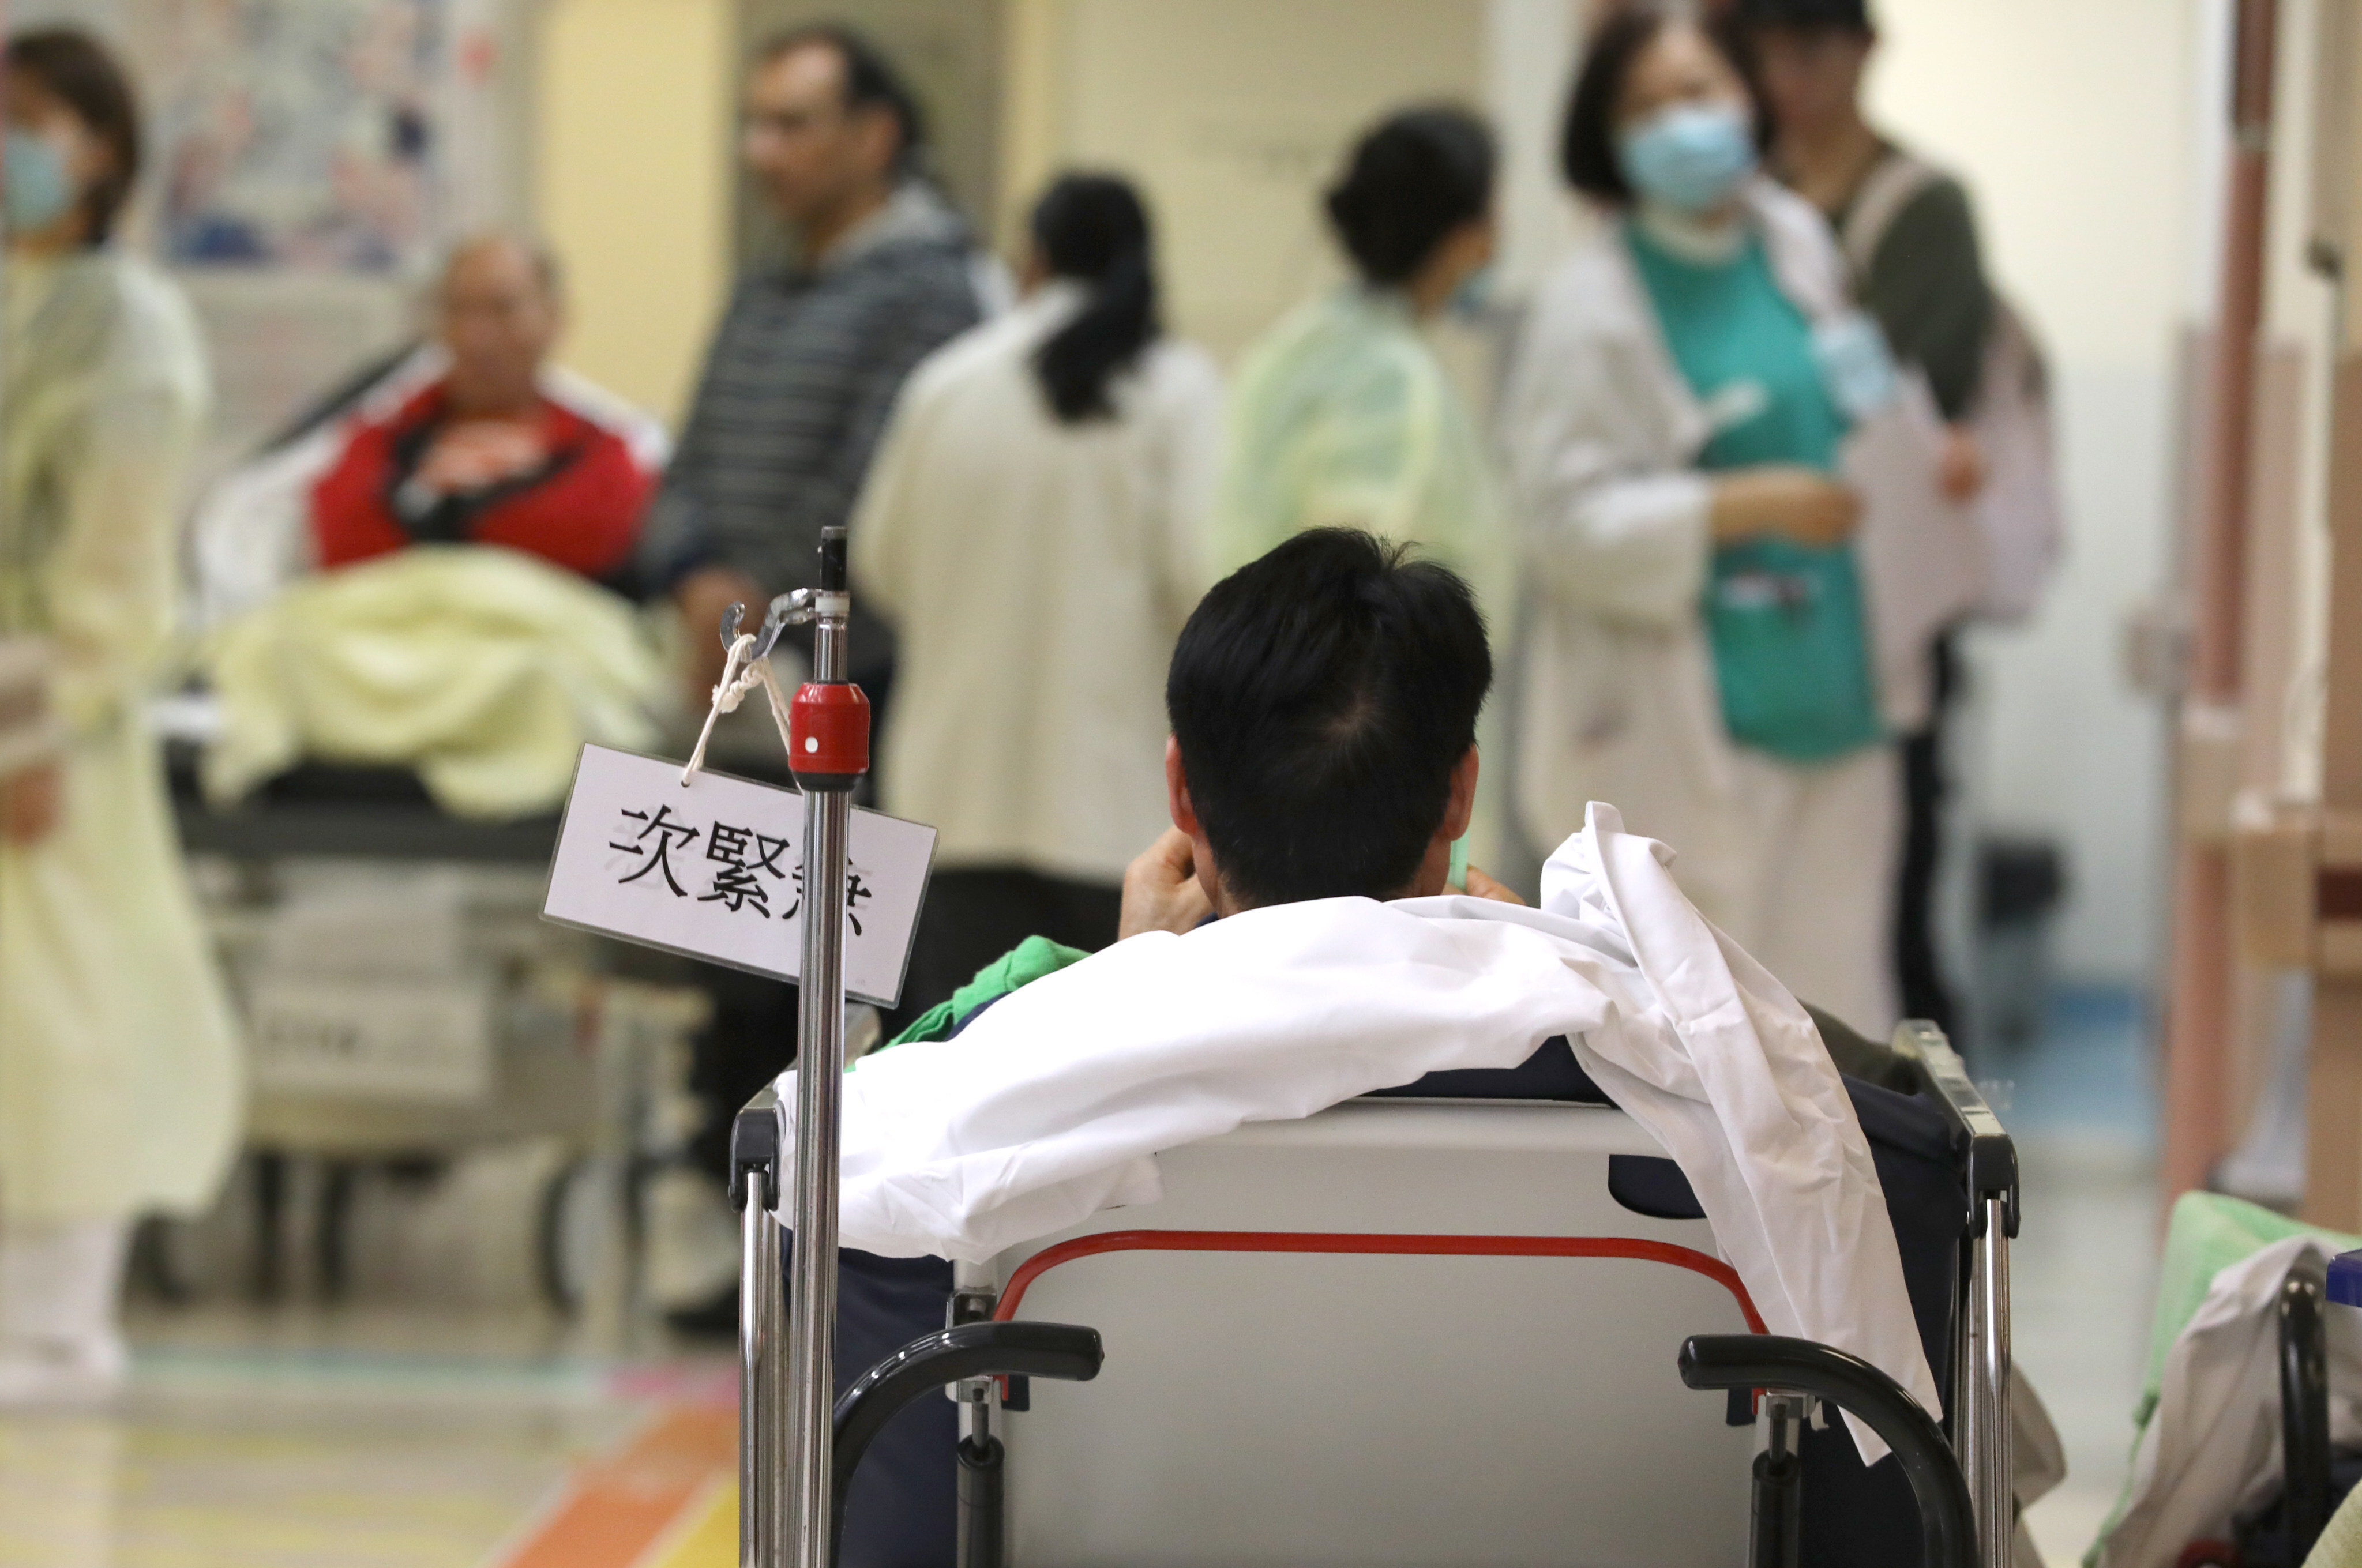 A patient waits in the accident and emergency department at Queen Elizabeth Hospital in Yau Ma Tei, on January 6, 2019. Hong Kong has two doctors for every 1,000 people, and a consequence of this is long waiting times and short consultations. Photo: Nora Tam

